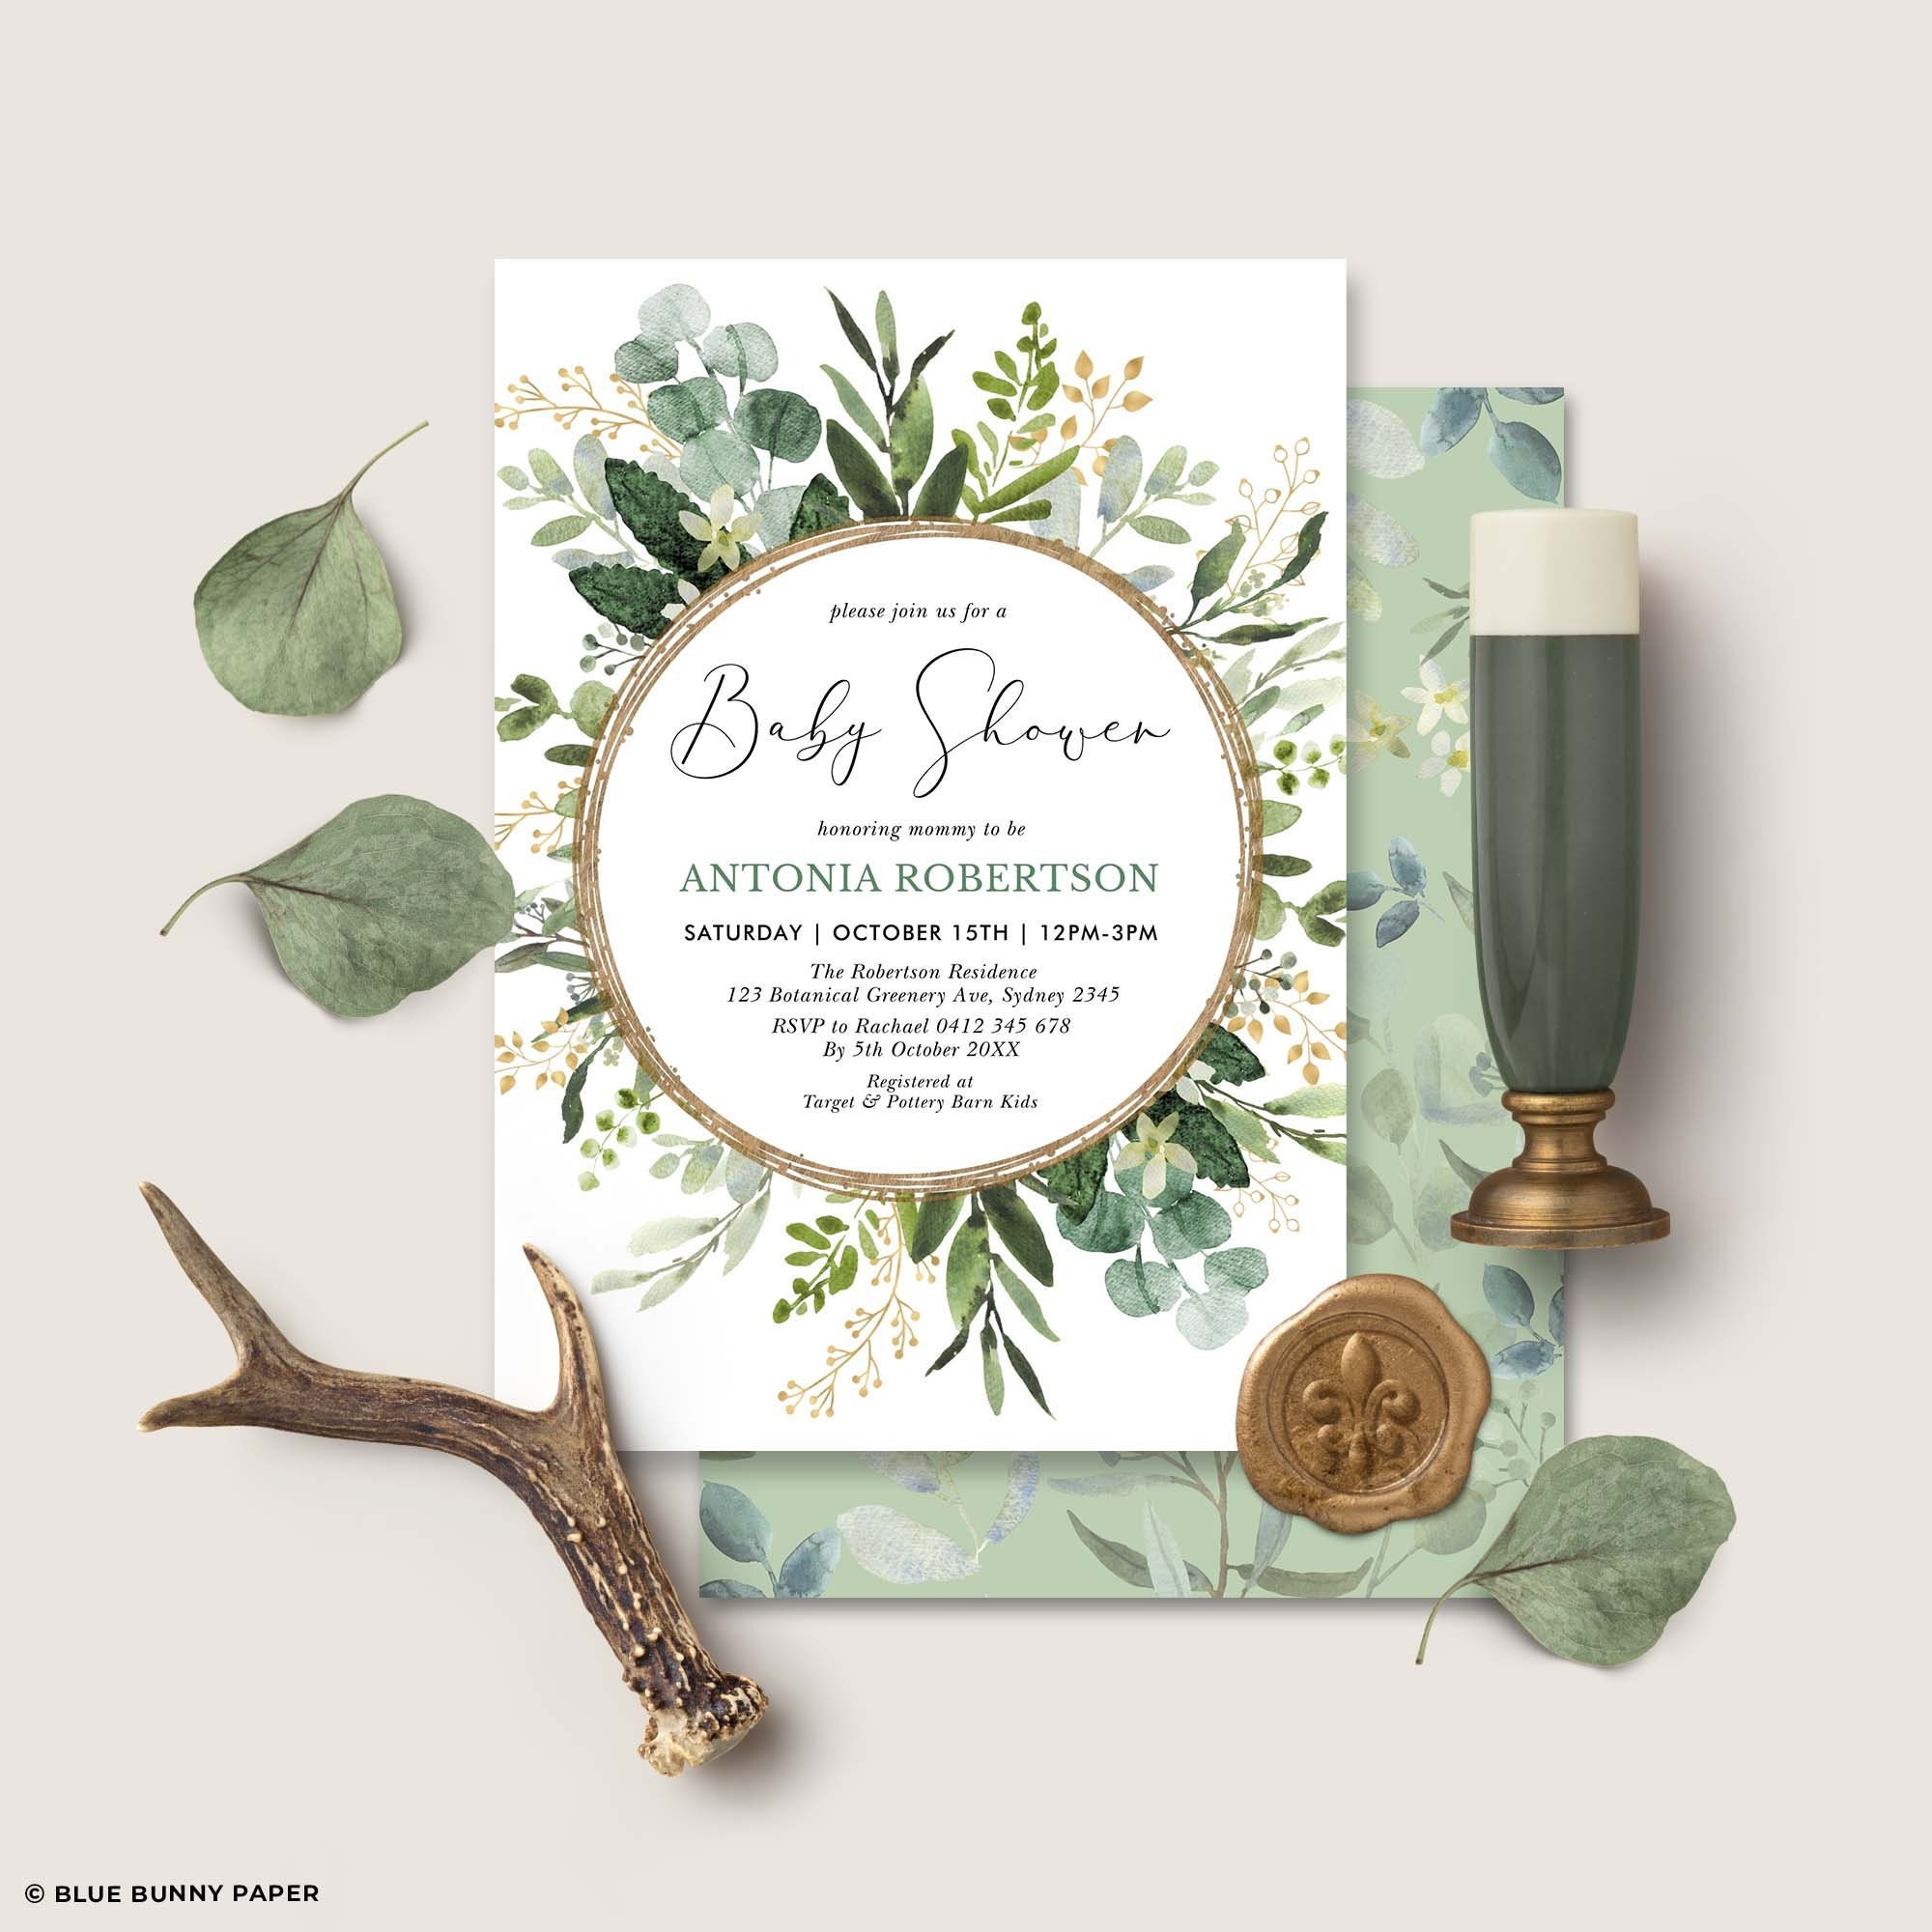 paper-invitations-editable-baby-shower-invite-greenery-and-gold